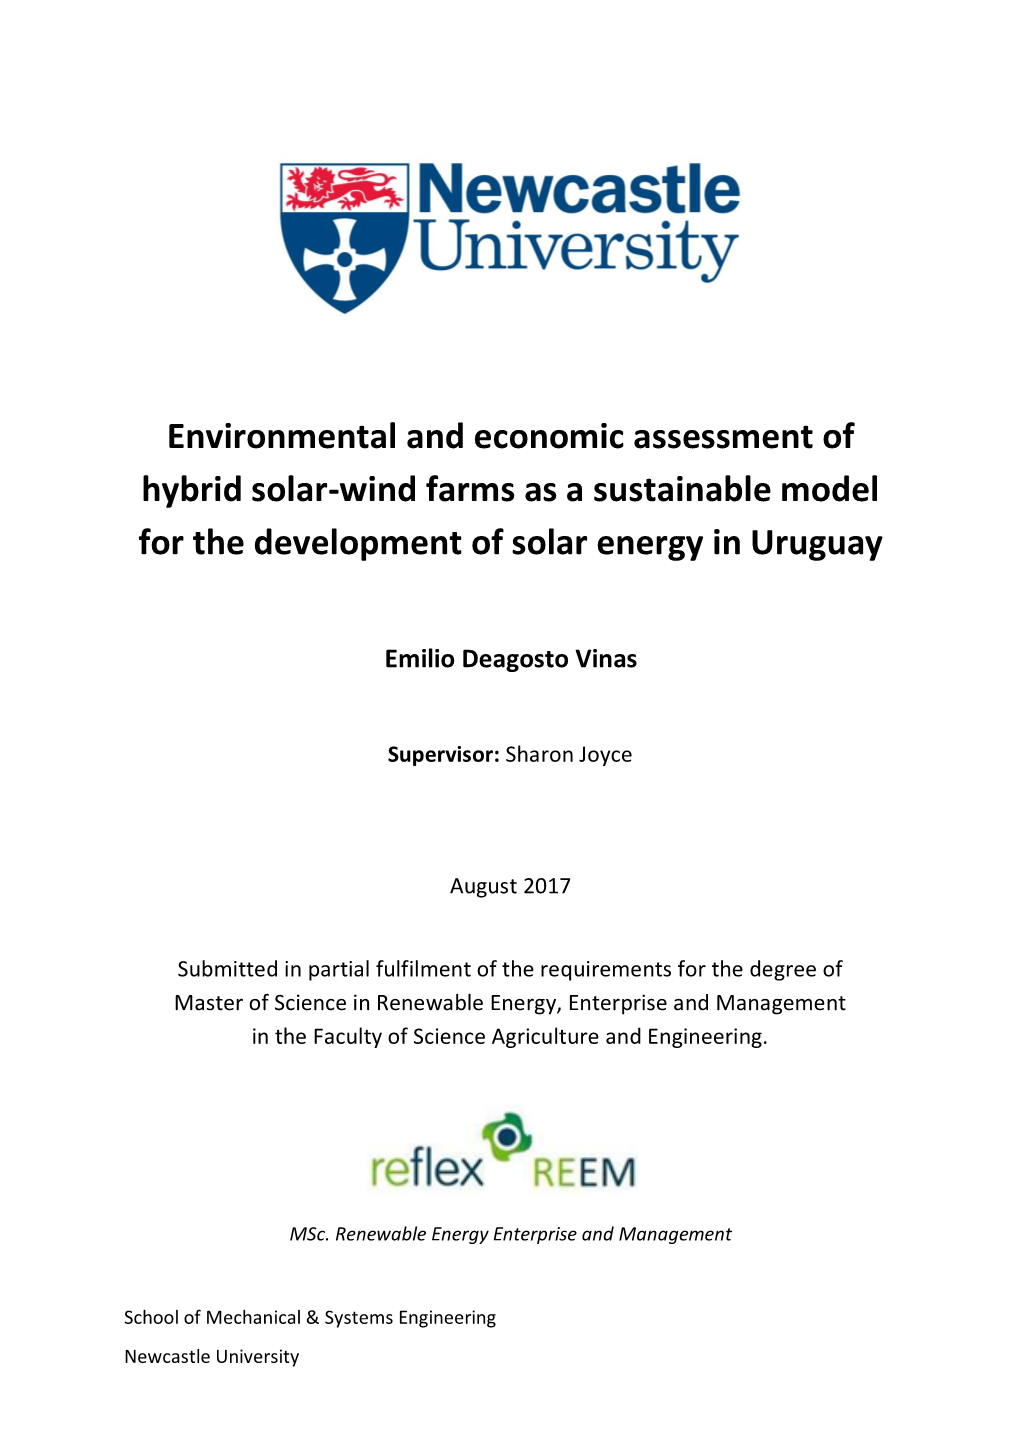 Environmental and Economic Assessment of Hybrid Solar-Wind Farms As a Sustainable Model for the Development of Solar Energy in Uruguay